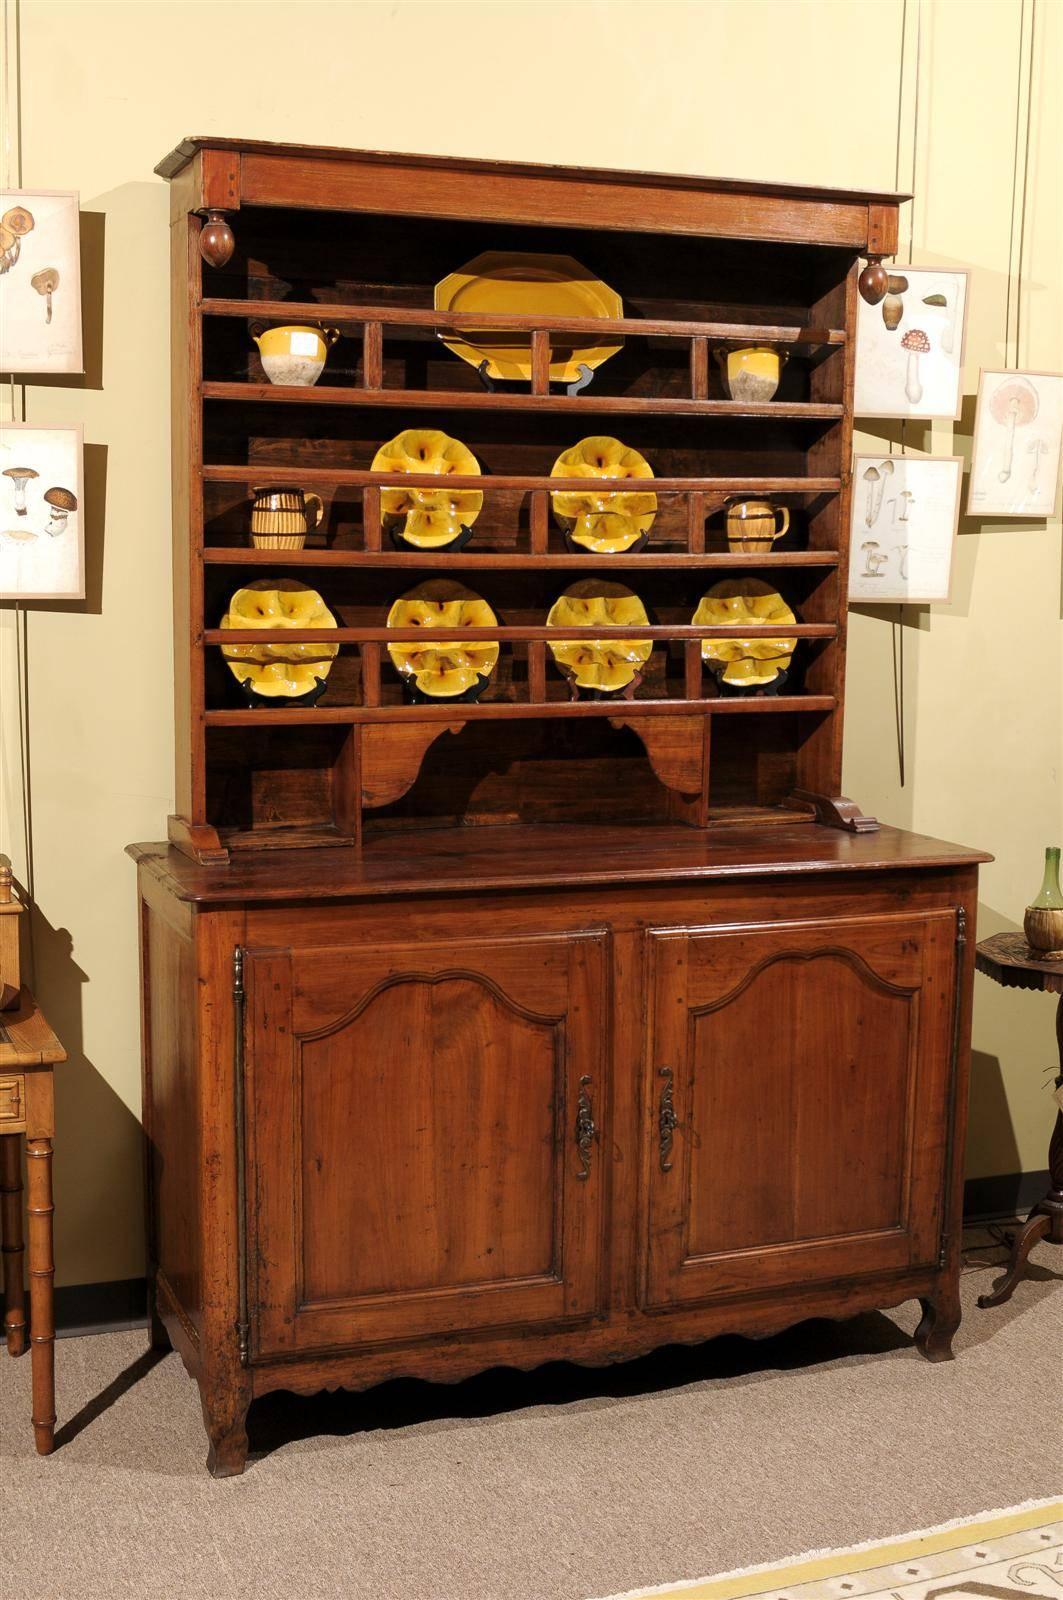 19th Century French Vaisselier in Cherry, circa 1880
There is a good amount of storage on the bottom here and spacious shelves above for display. The French would have used this piece in the kitchen or dining room and would have stored their plates